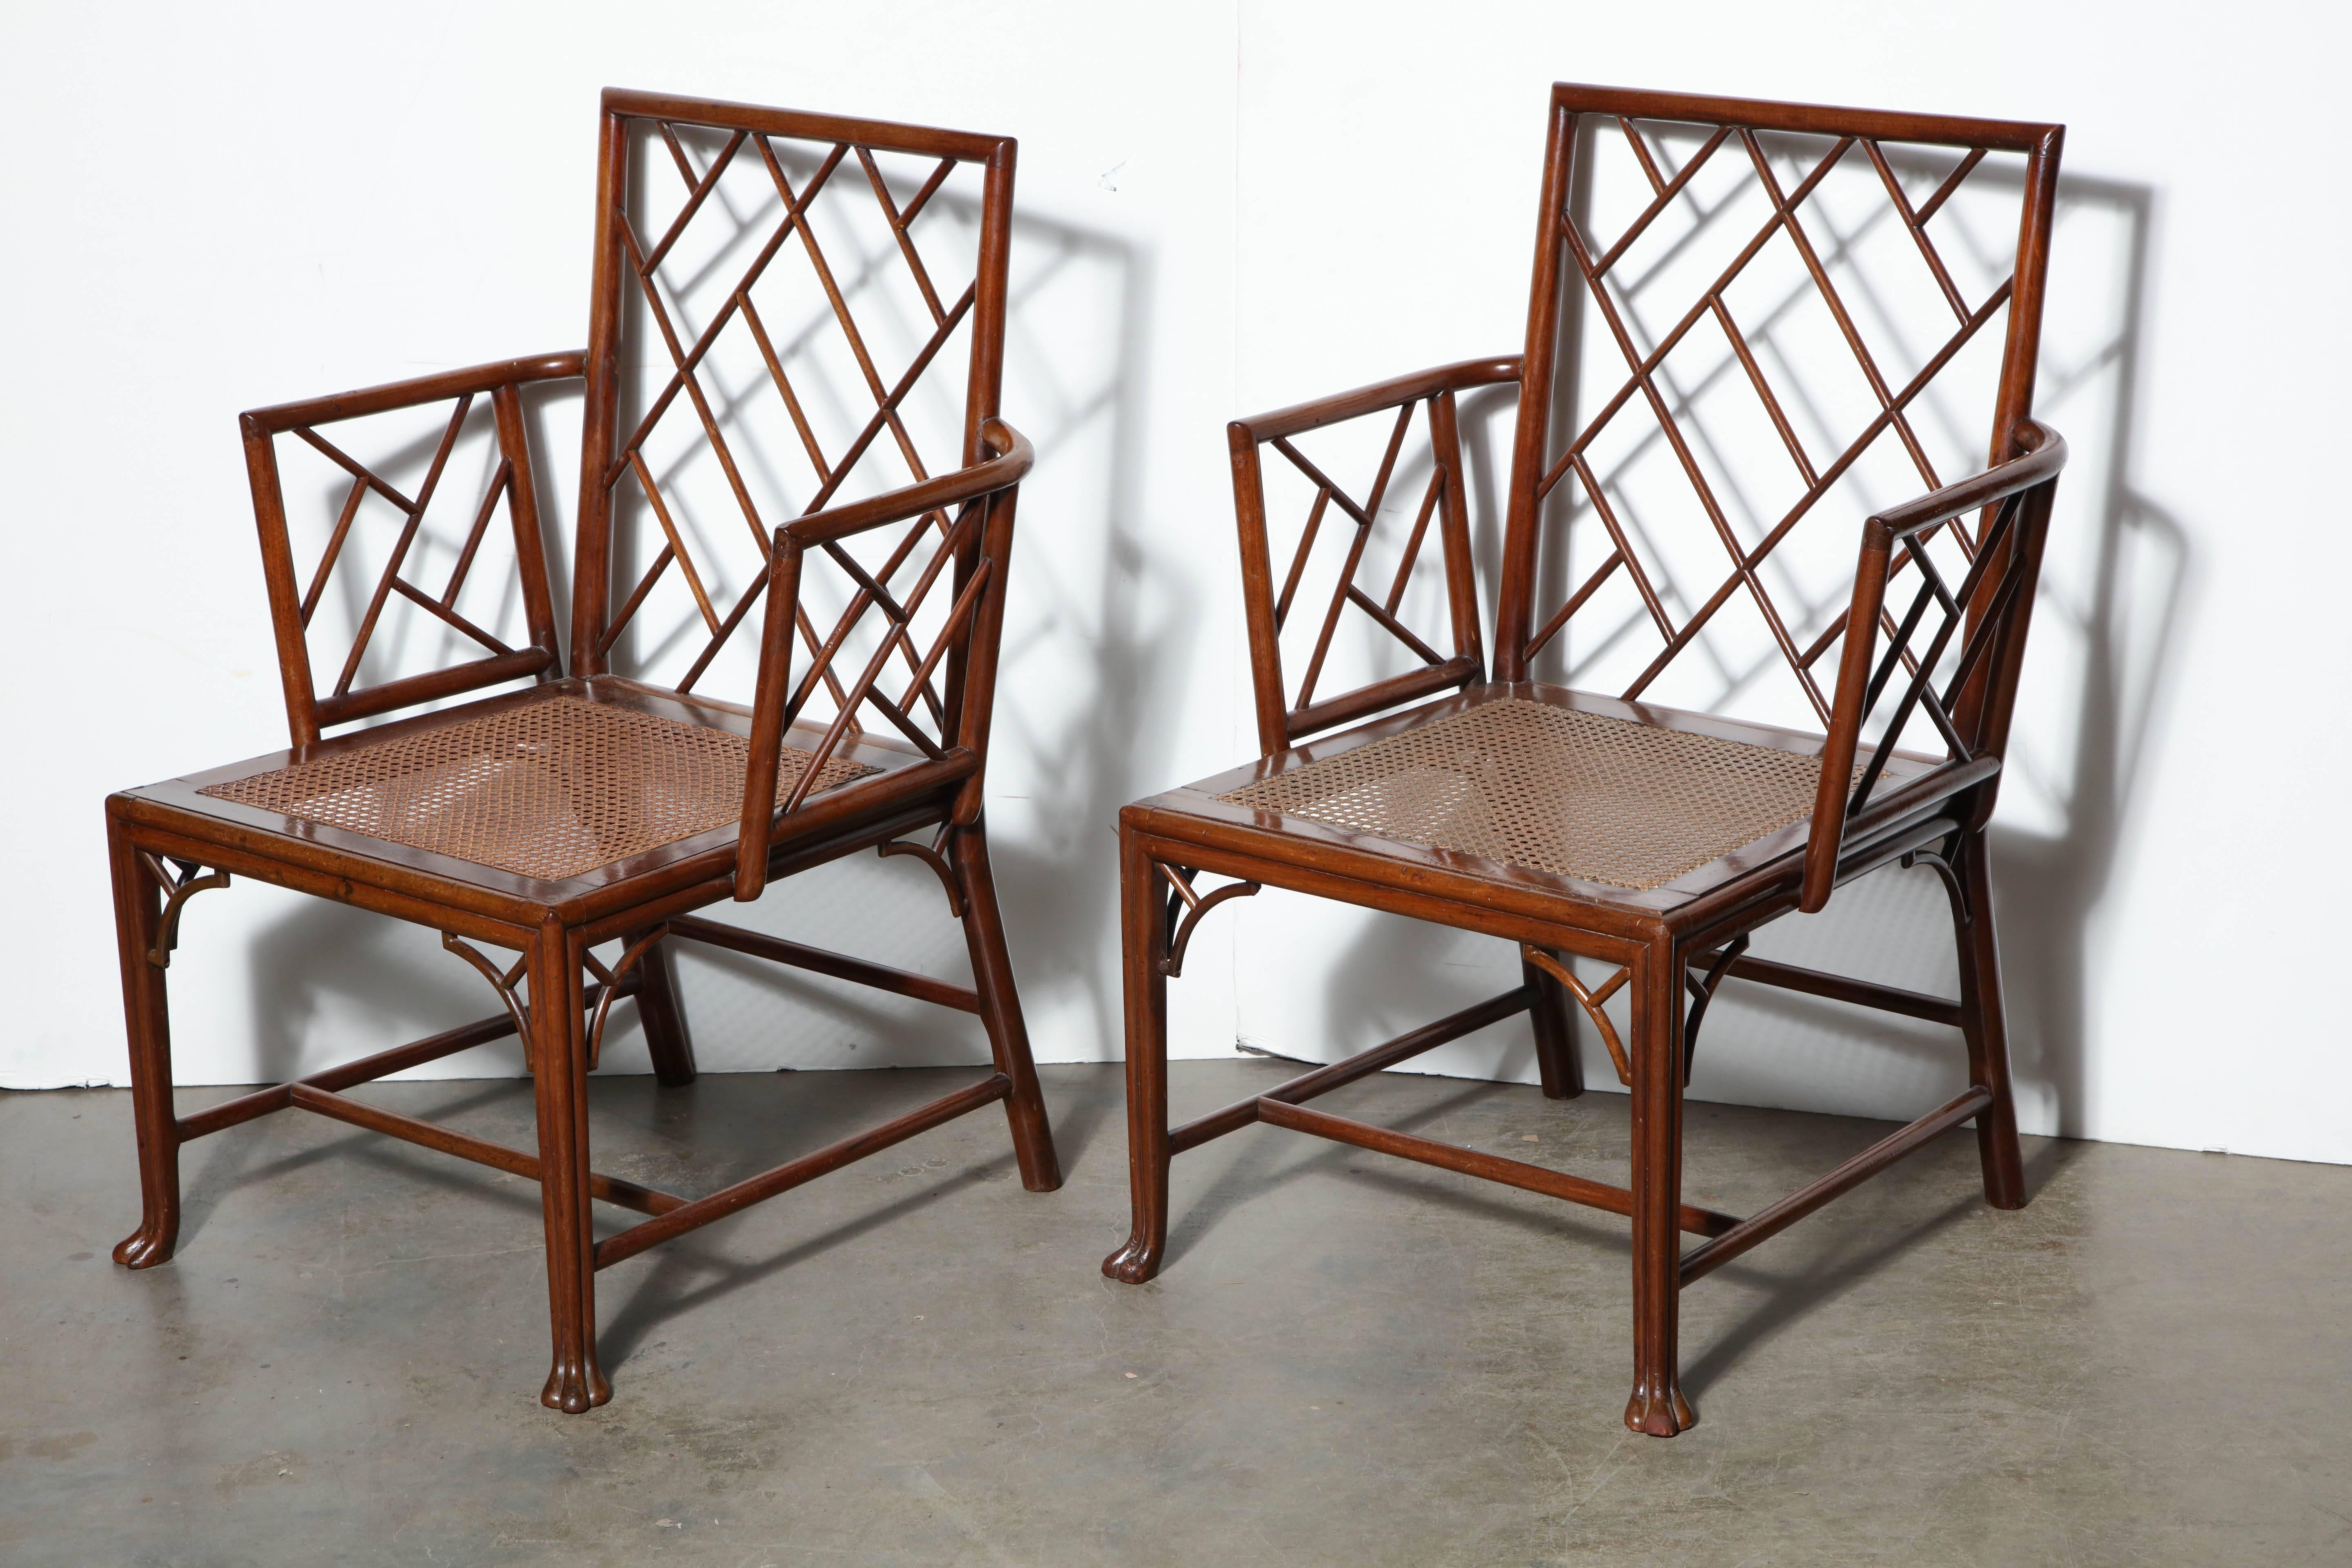 Pair of George III Padouk wood caned seat cockpen armchairs with pierced corner brackets, cluster column legs and paw feet.